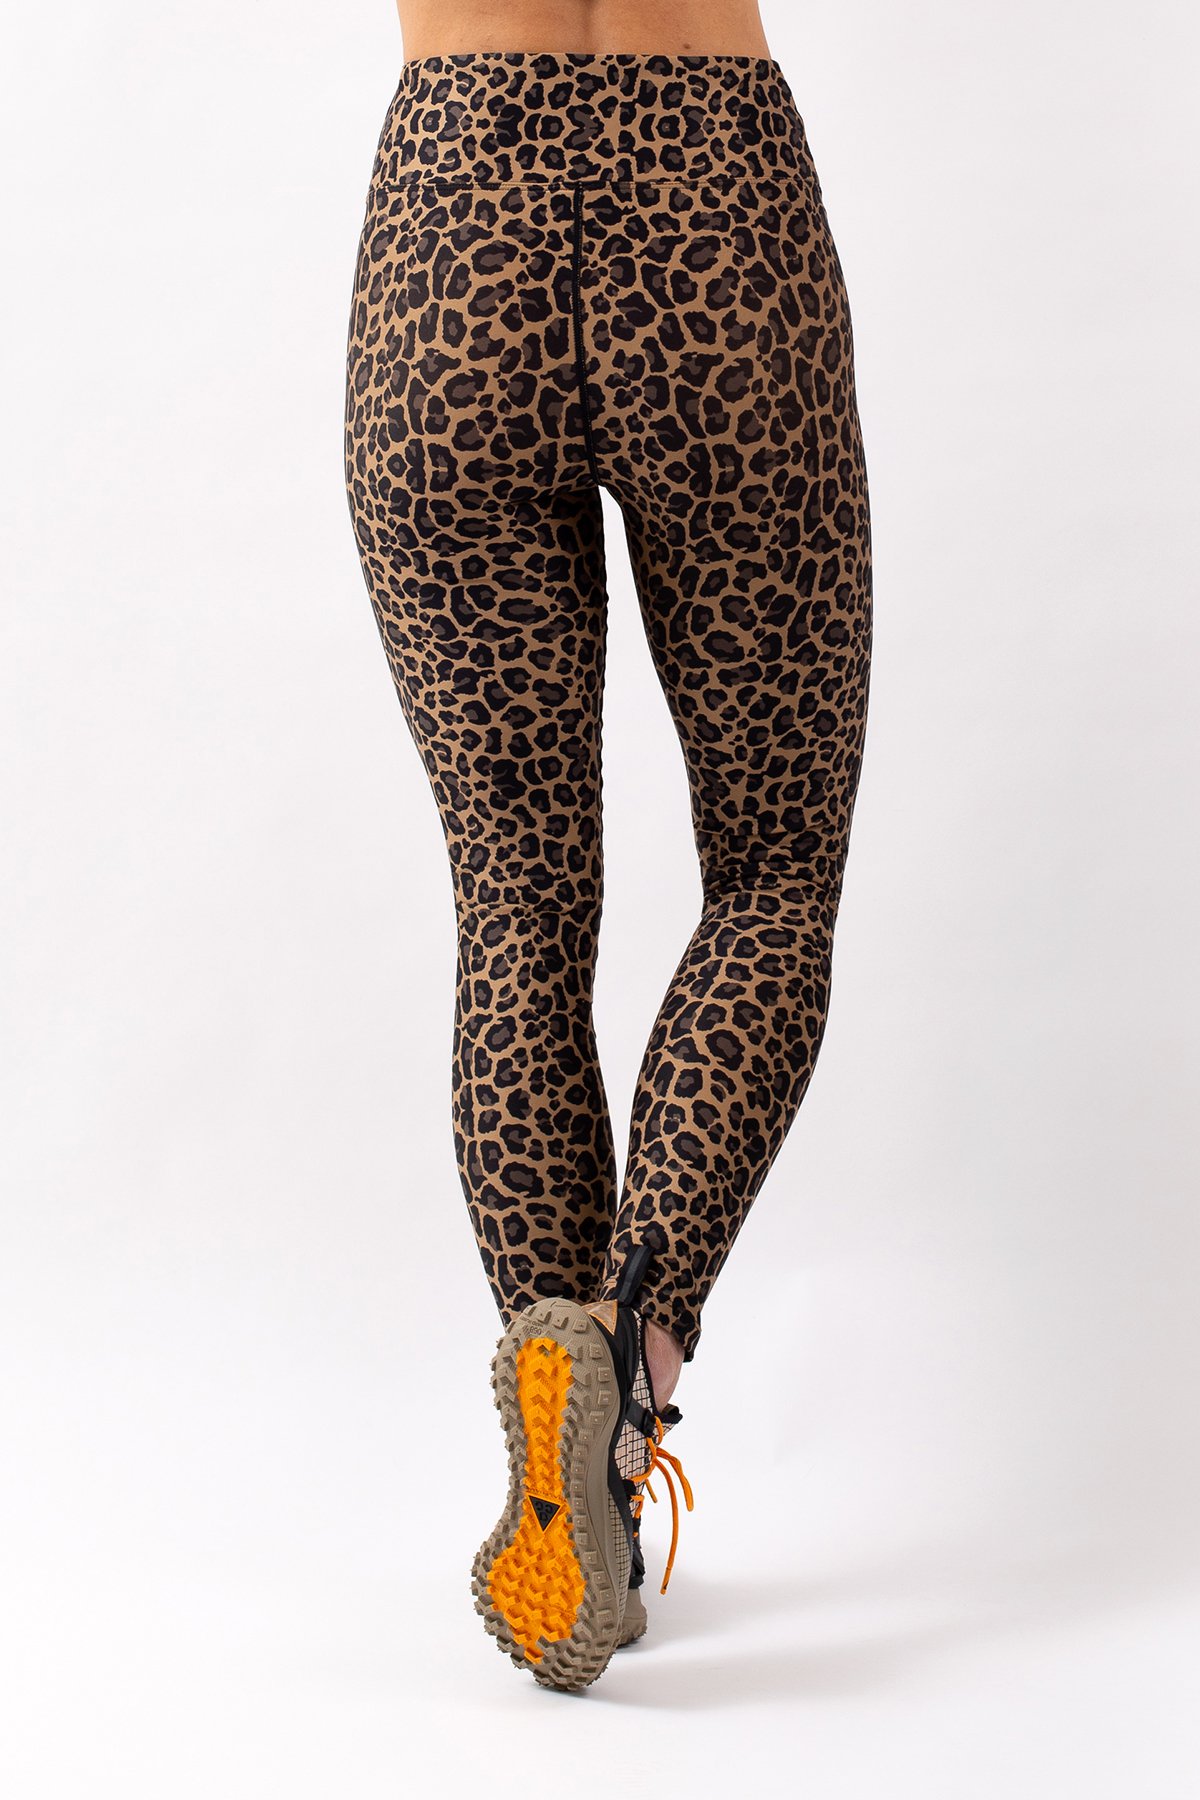 Icecold Tights - Leopard | M